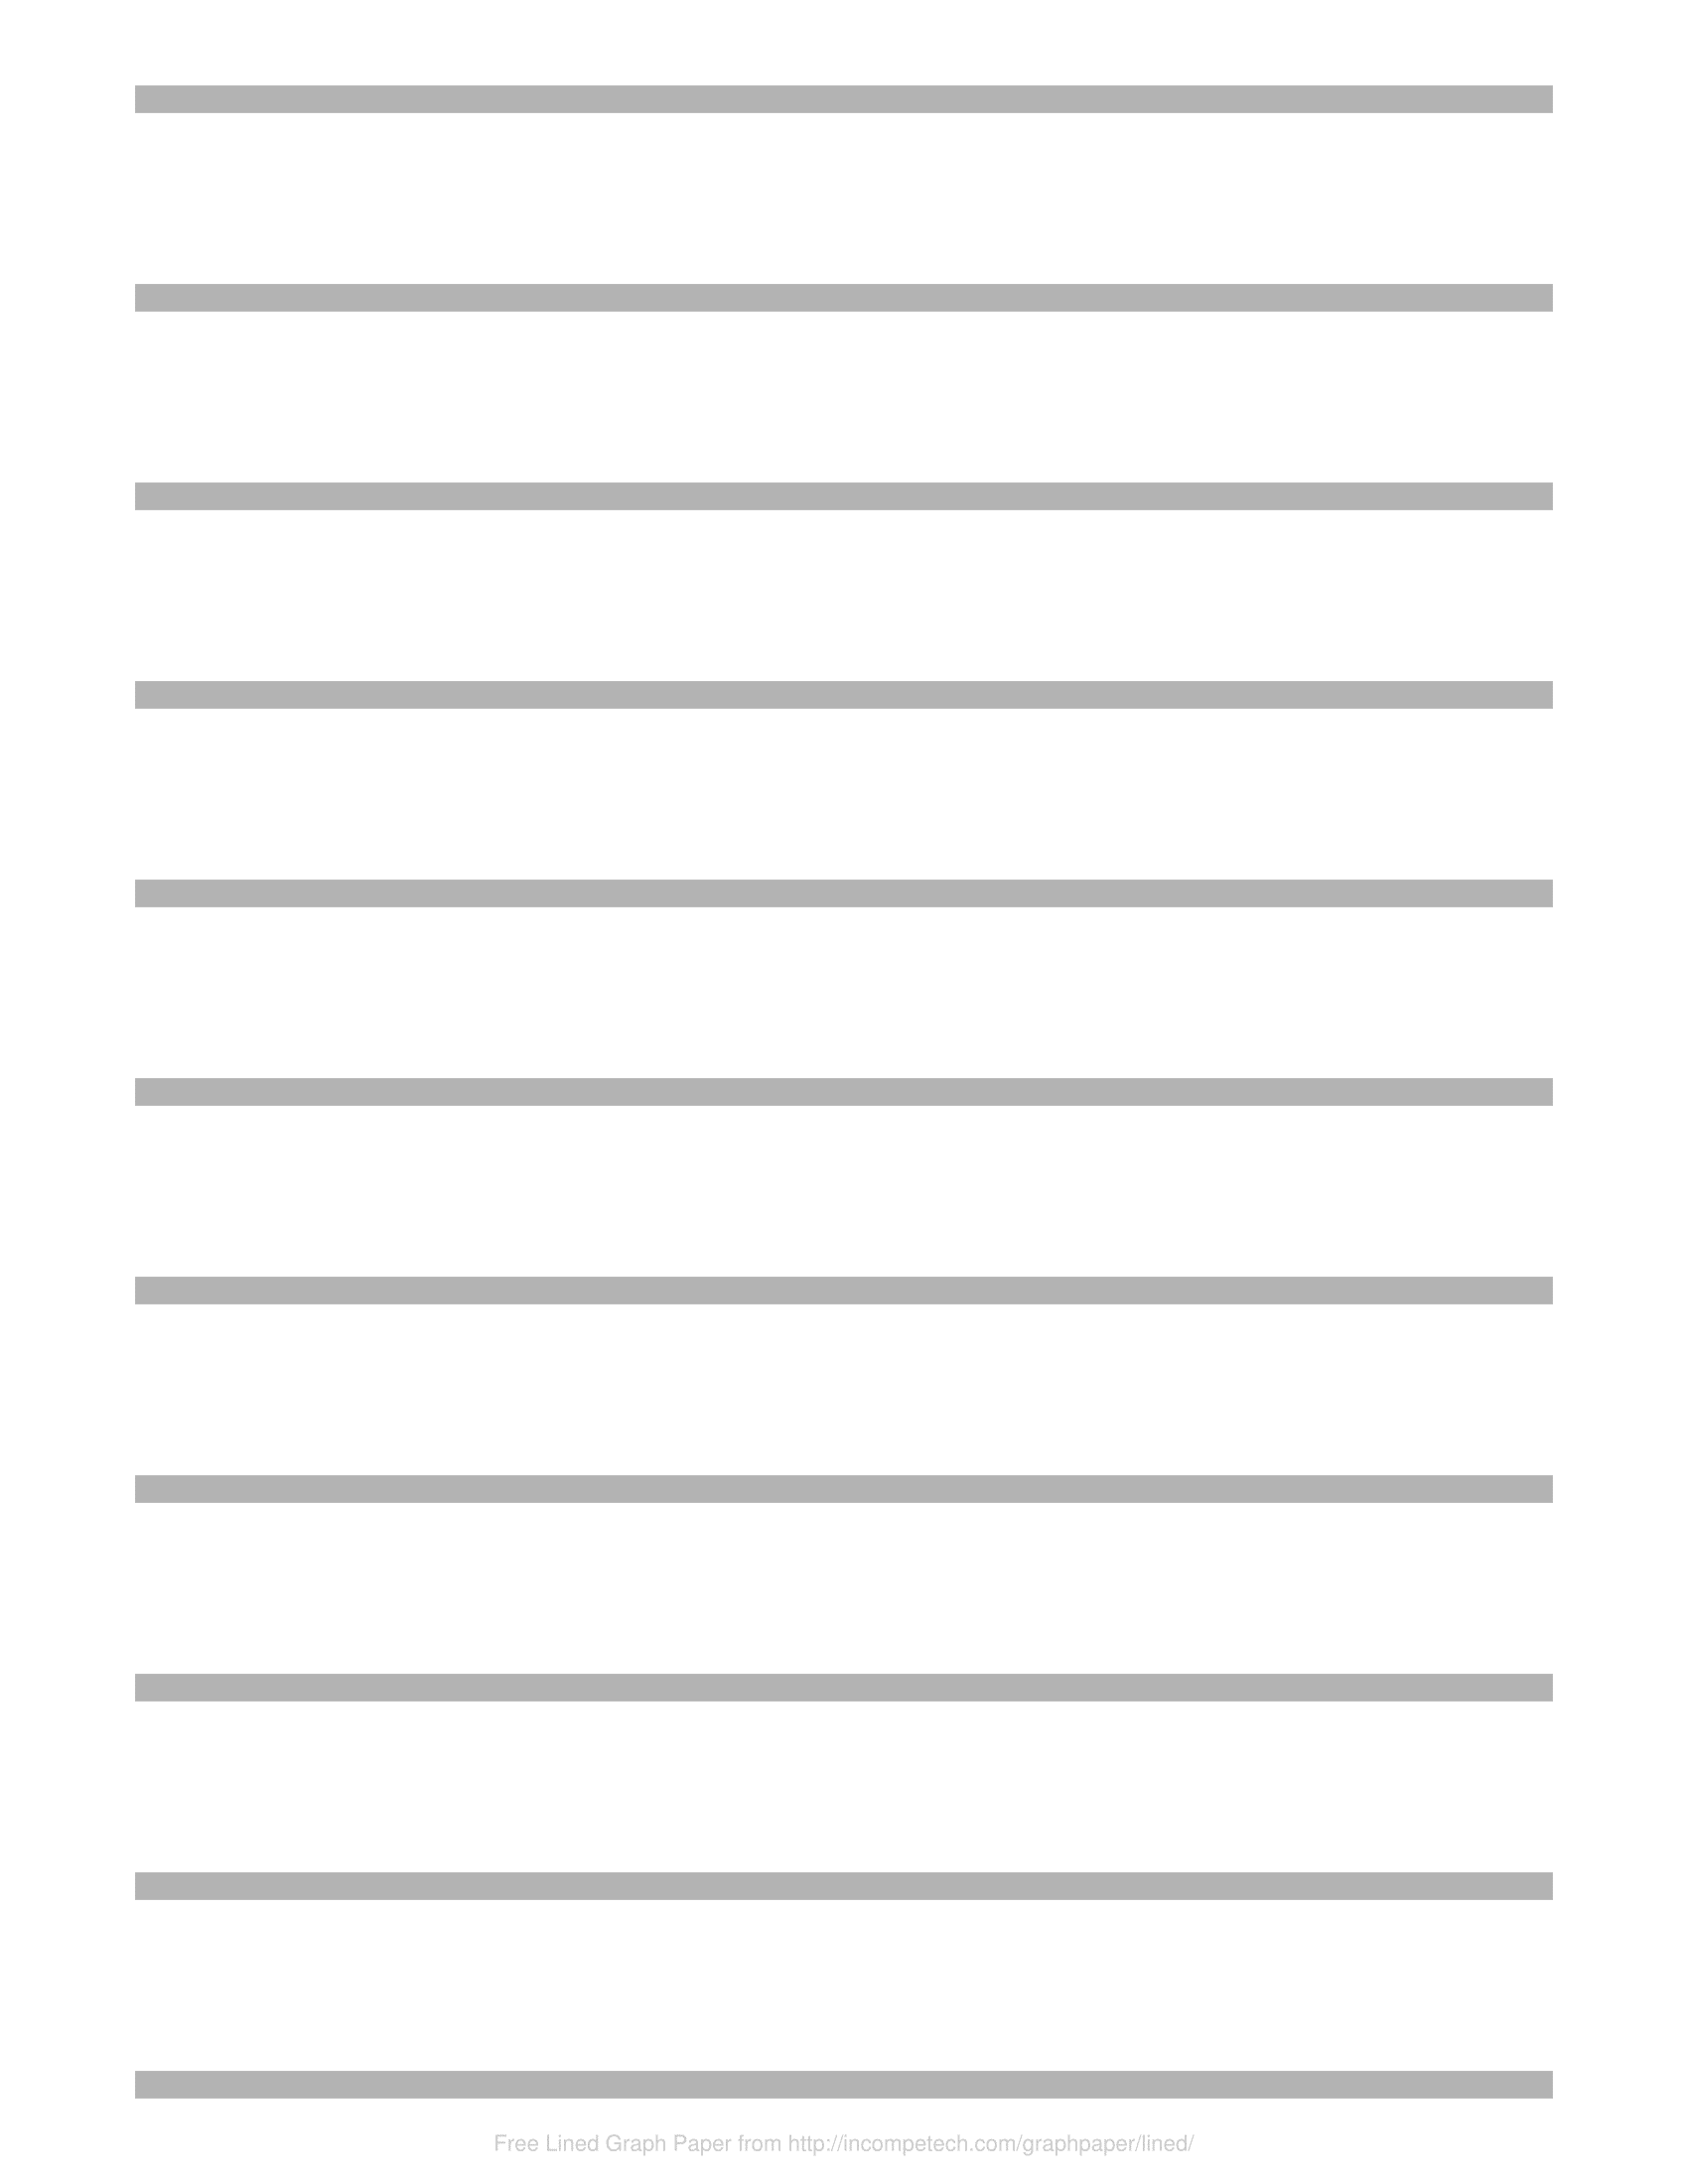 https://incompetech.com/graphpaper/lined/Just%20Lines%201lpi%20Grey.png